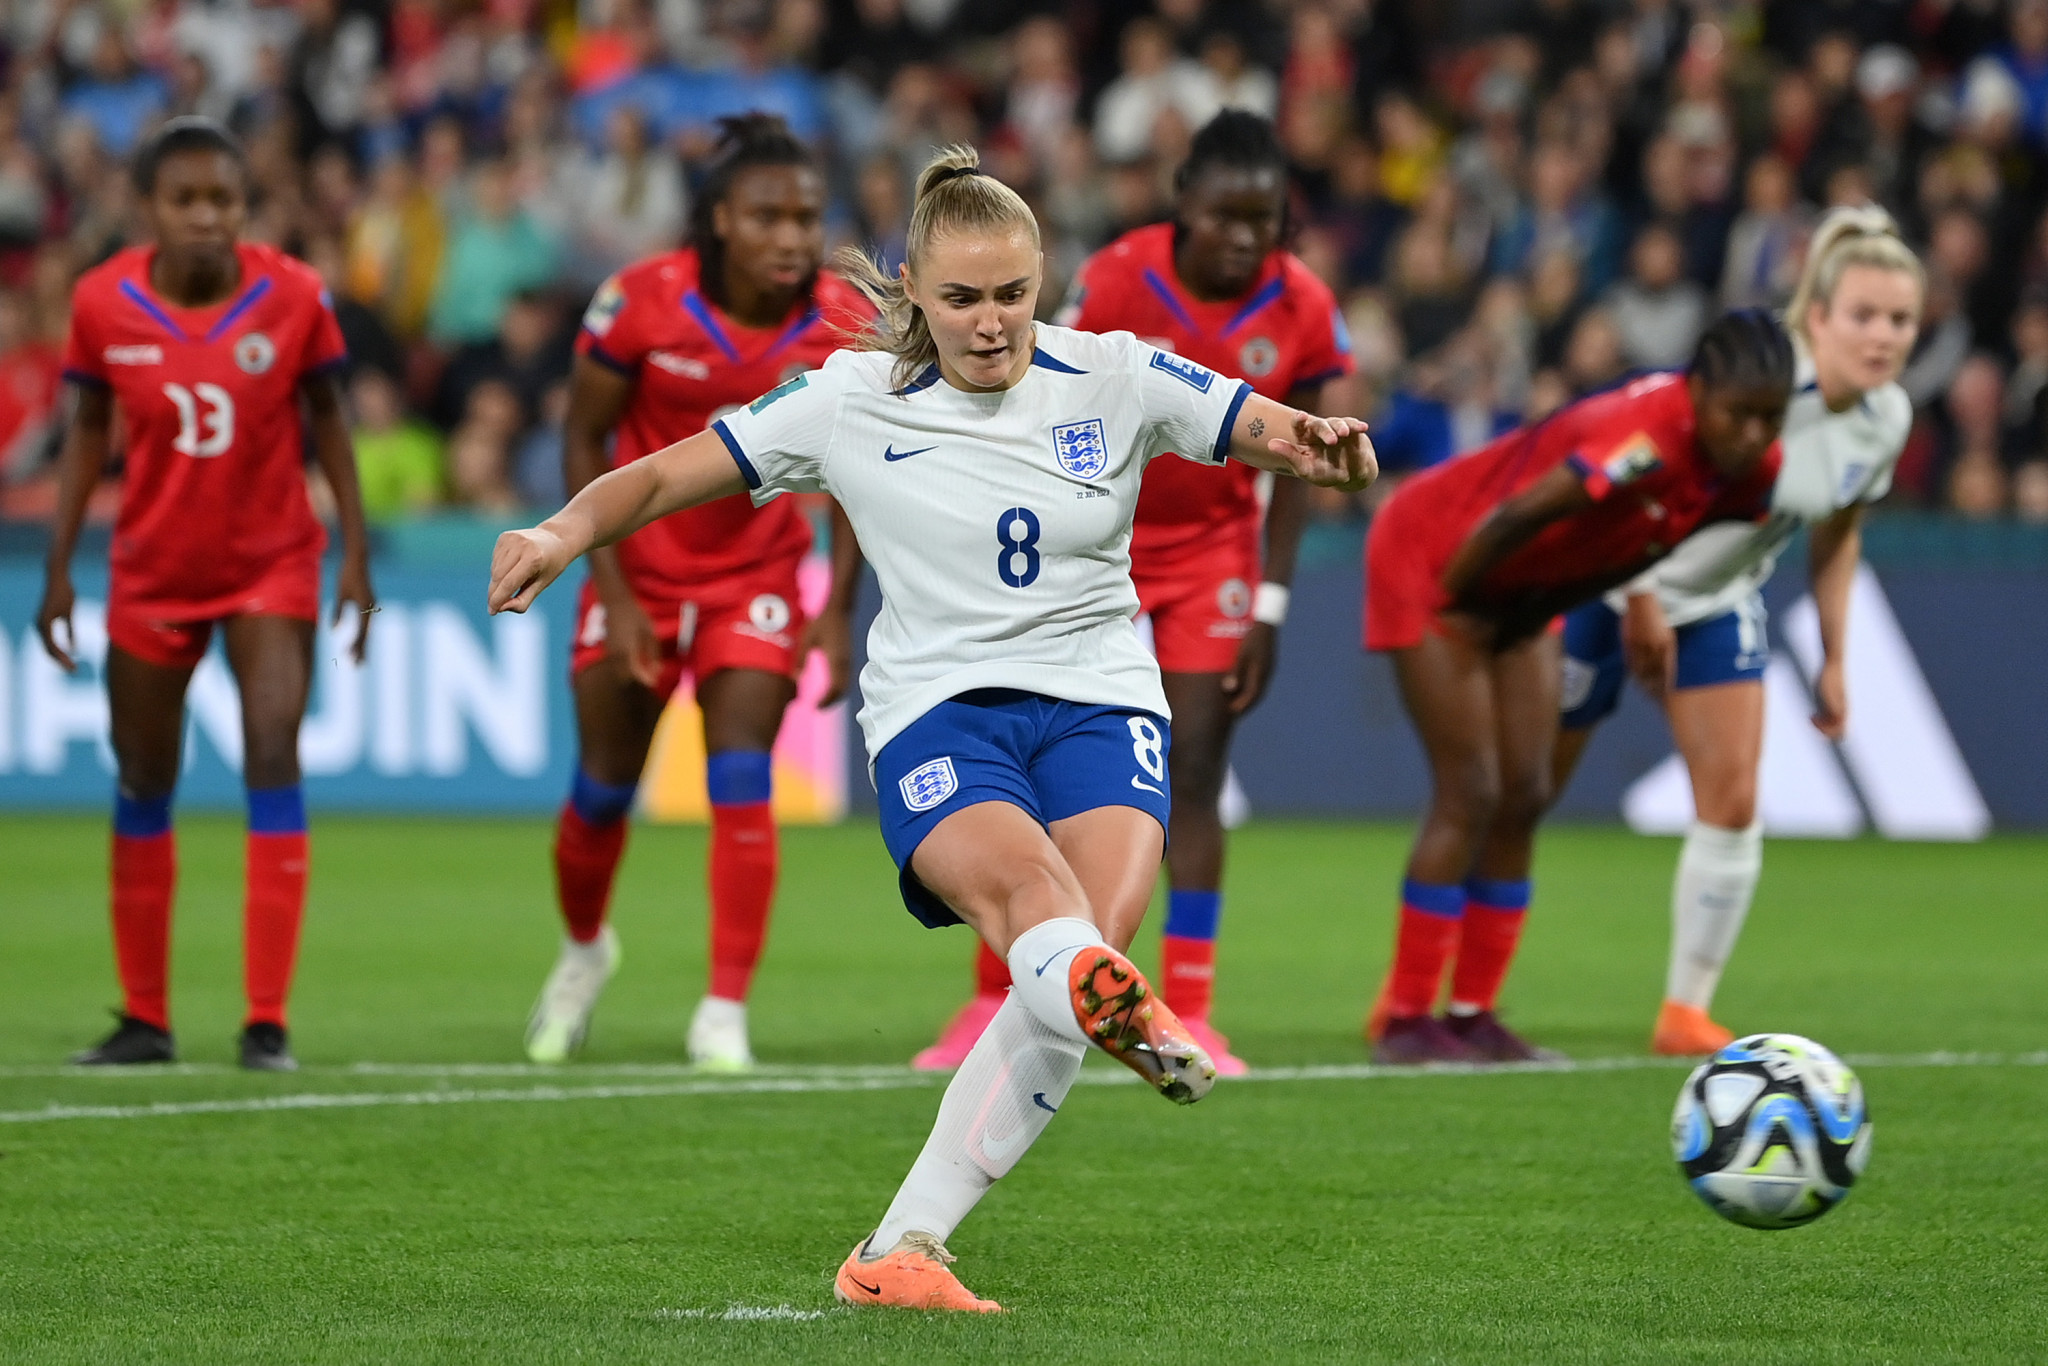 European champions England survive scare against debutants Haiti in FIFA Women's World Cup opener